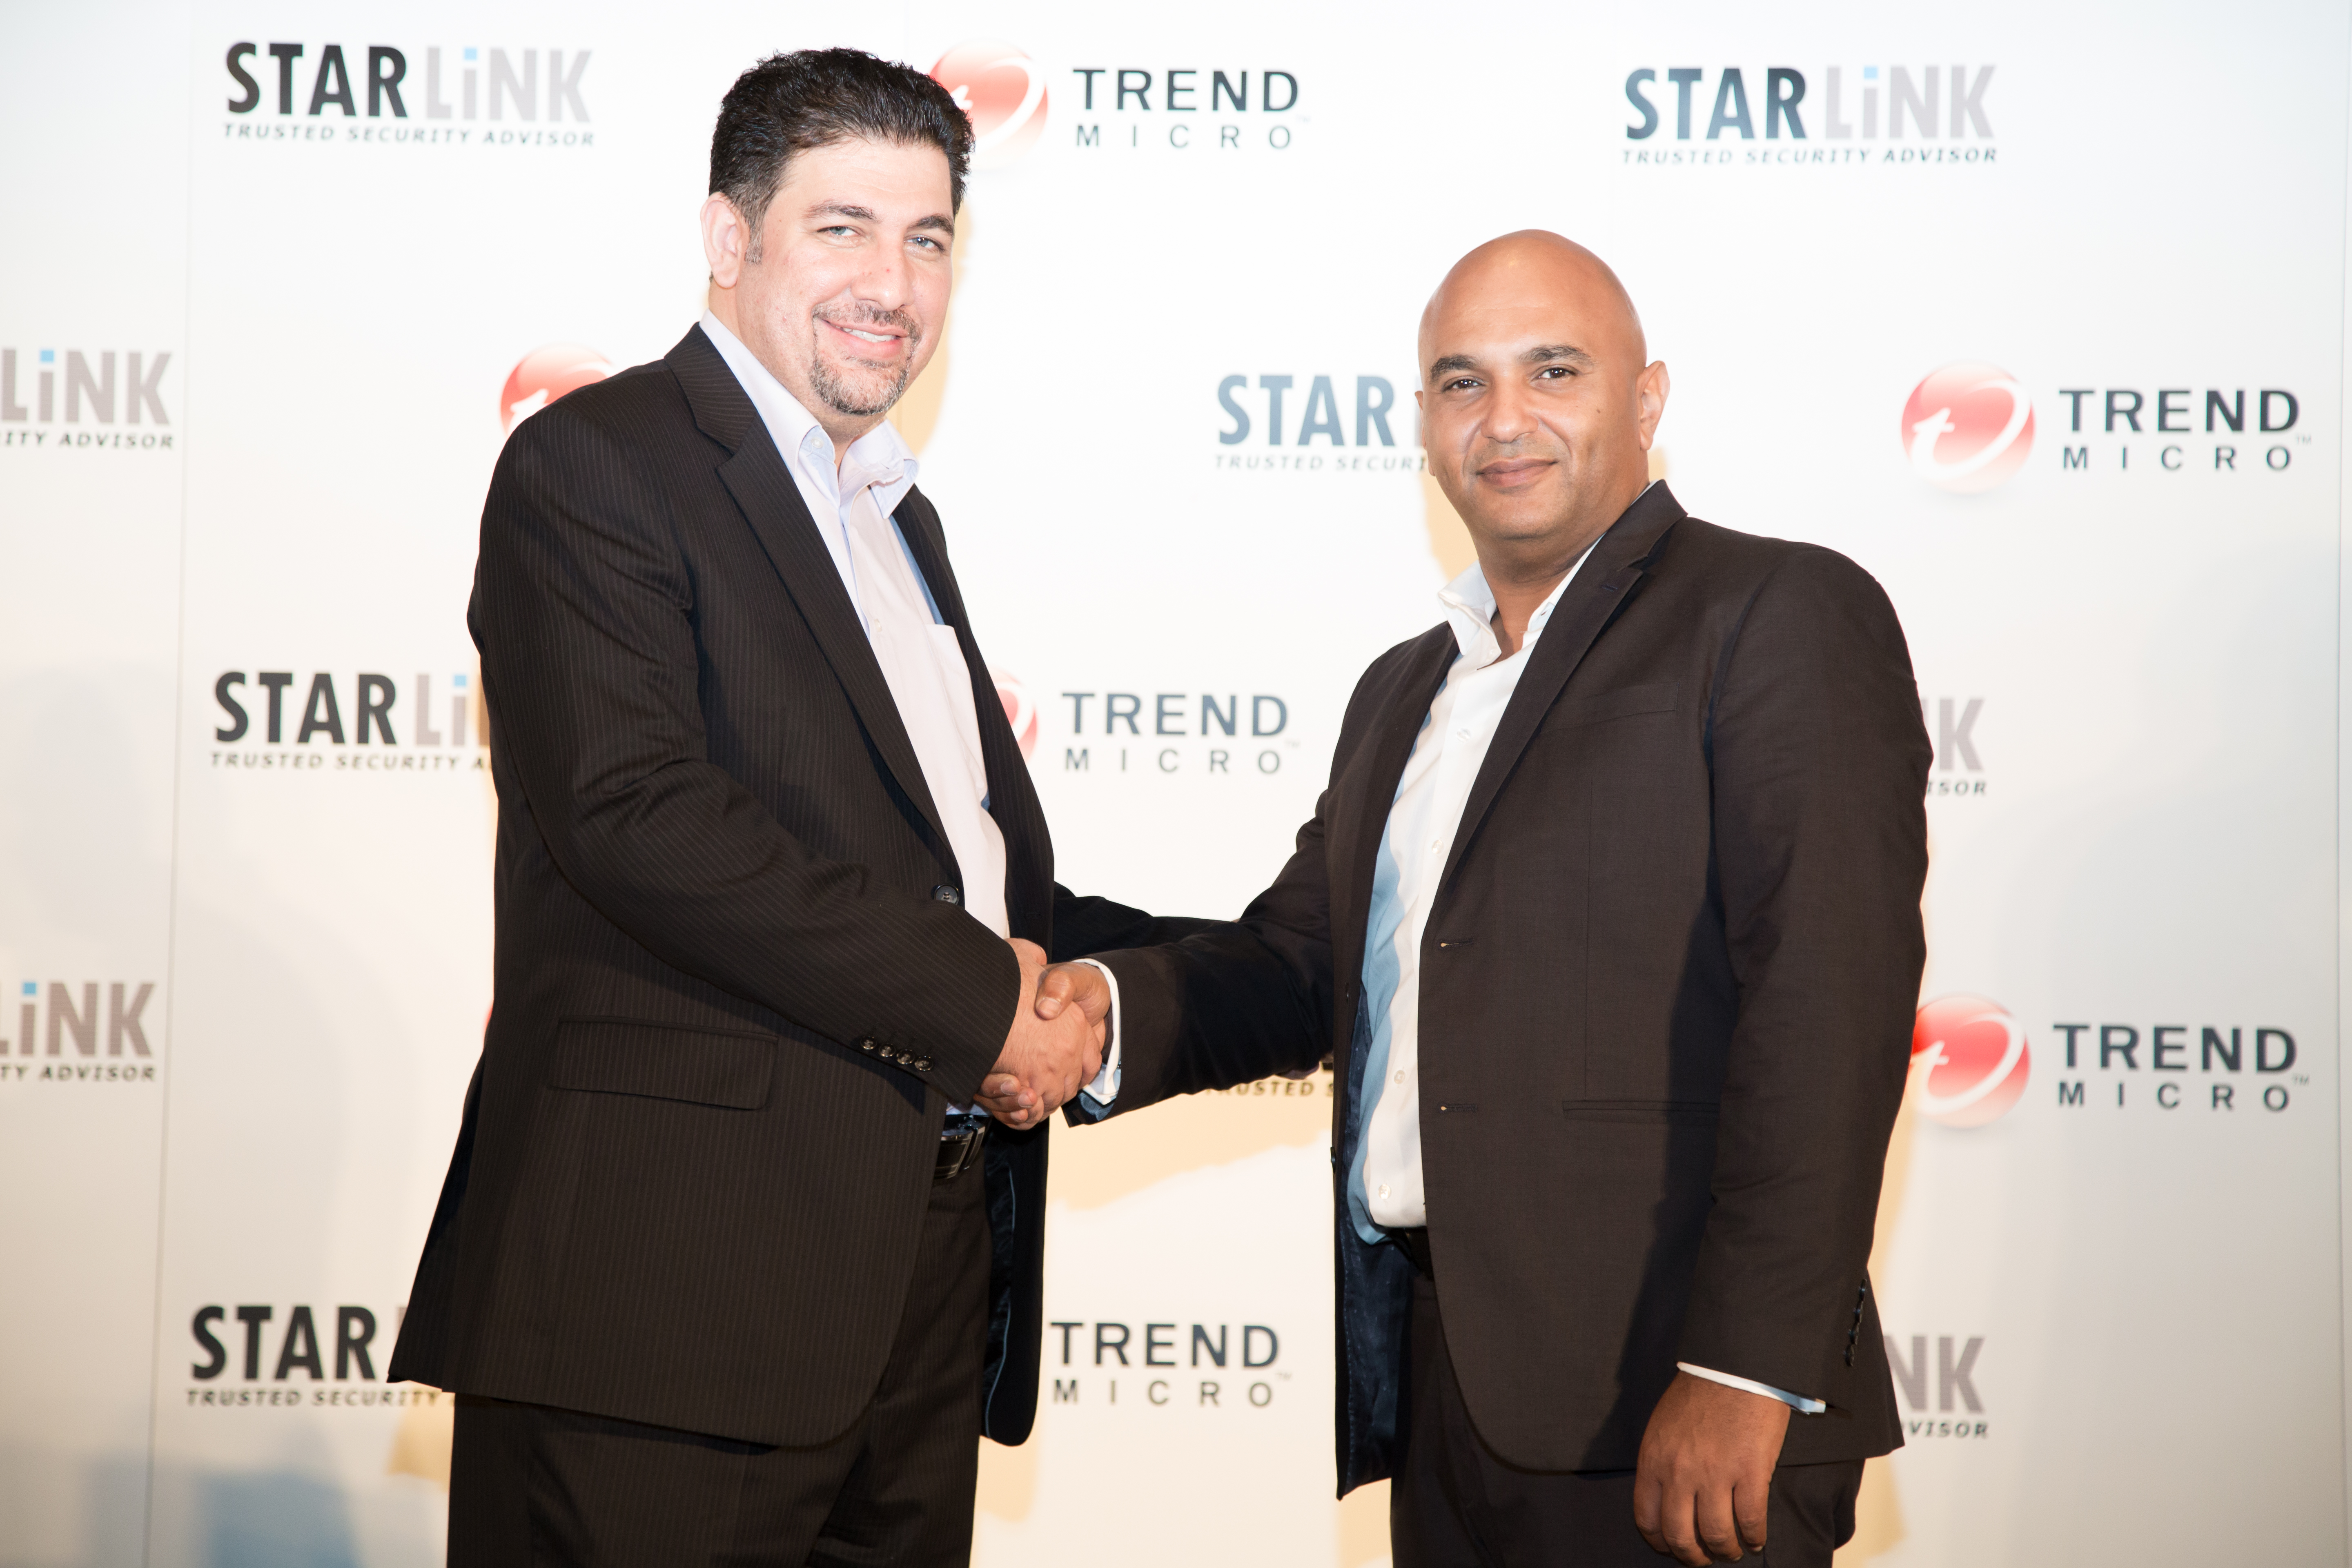 Trend Micro strengthens MENA distribution channel with StarLink